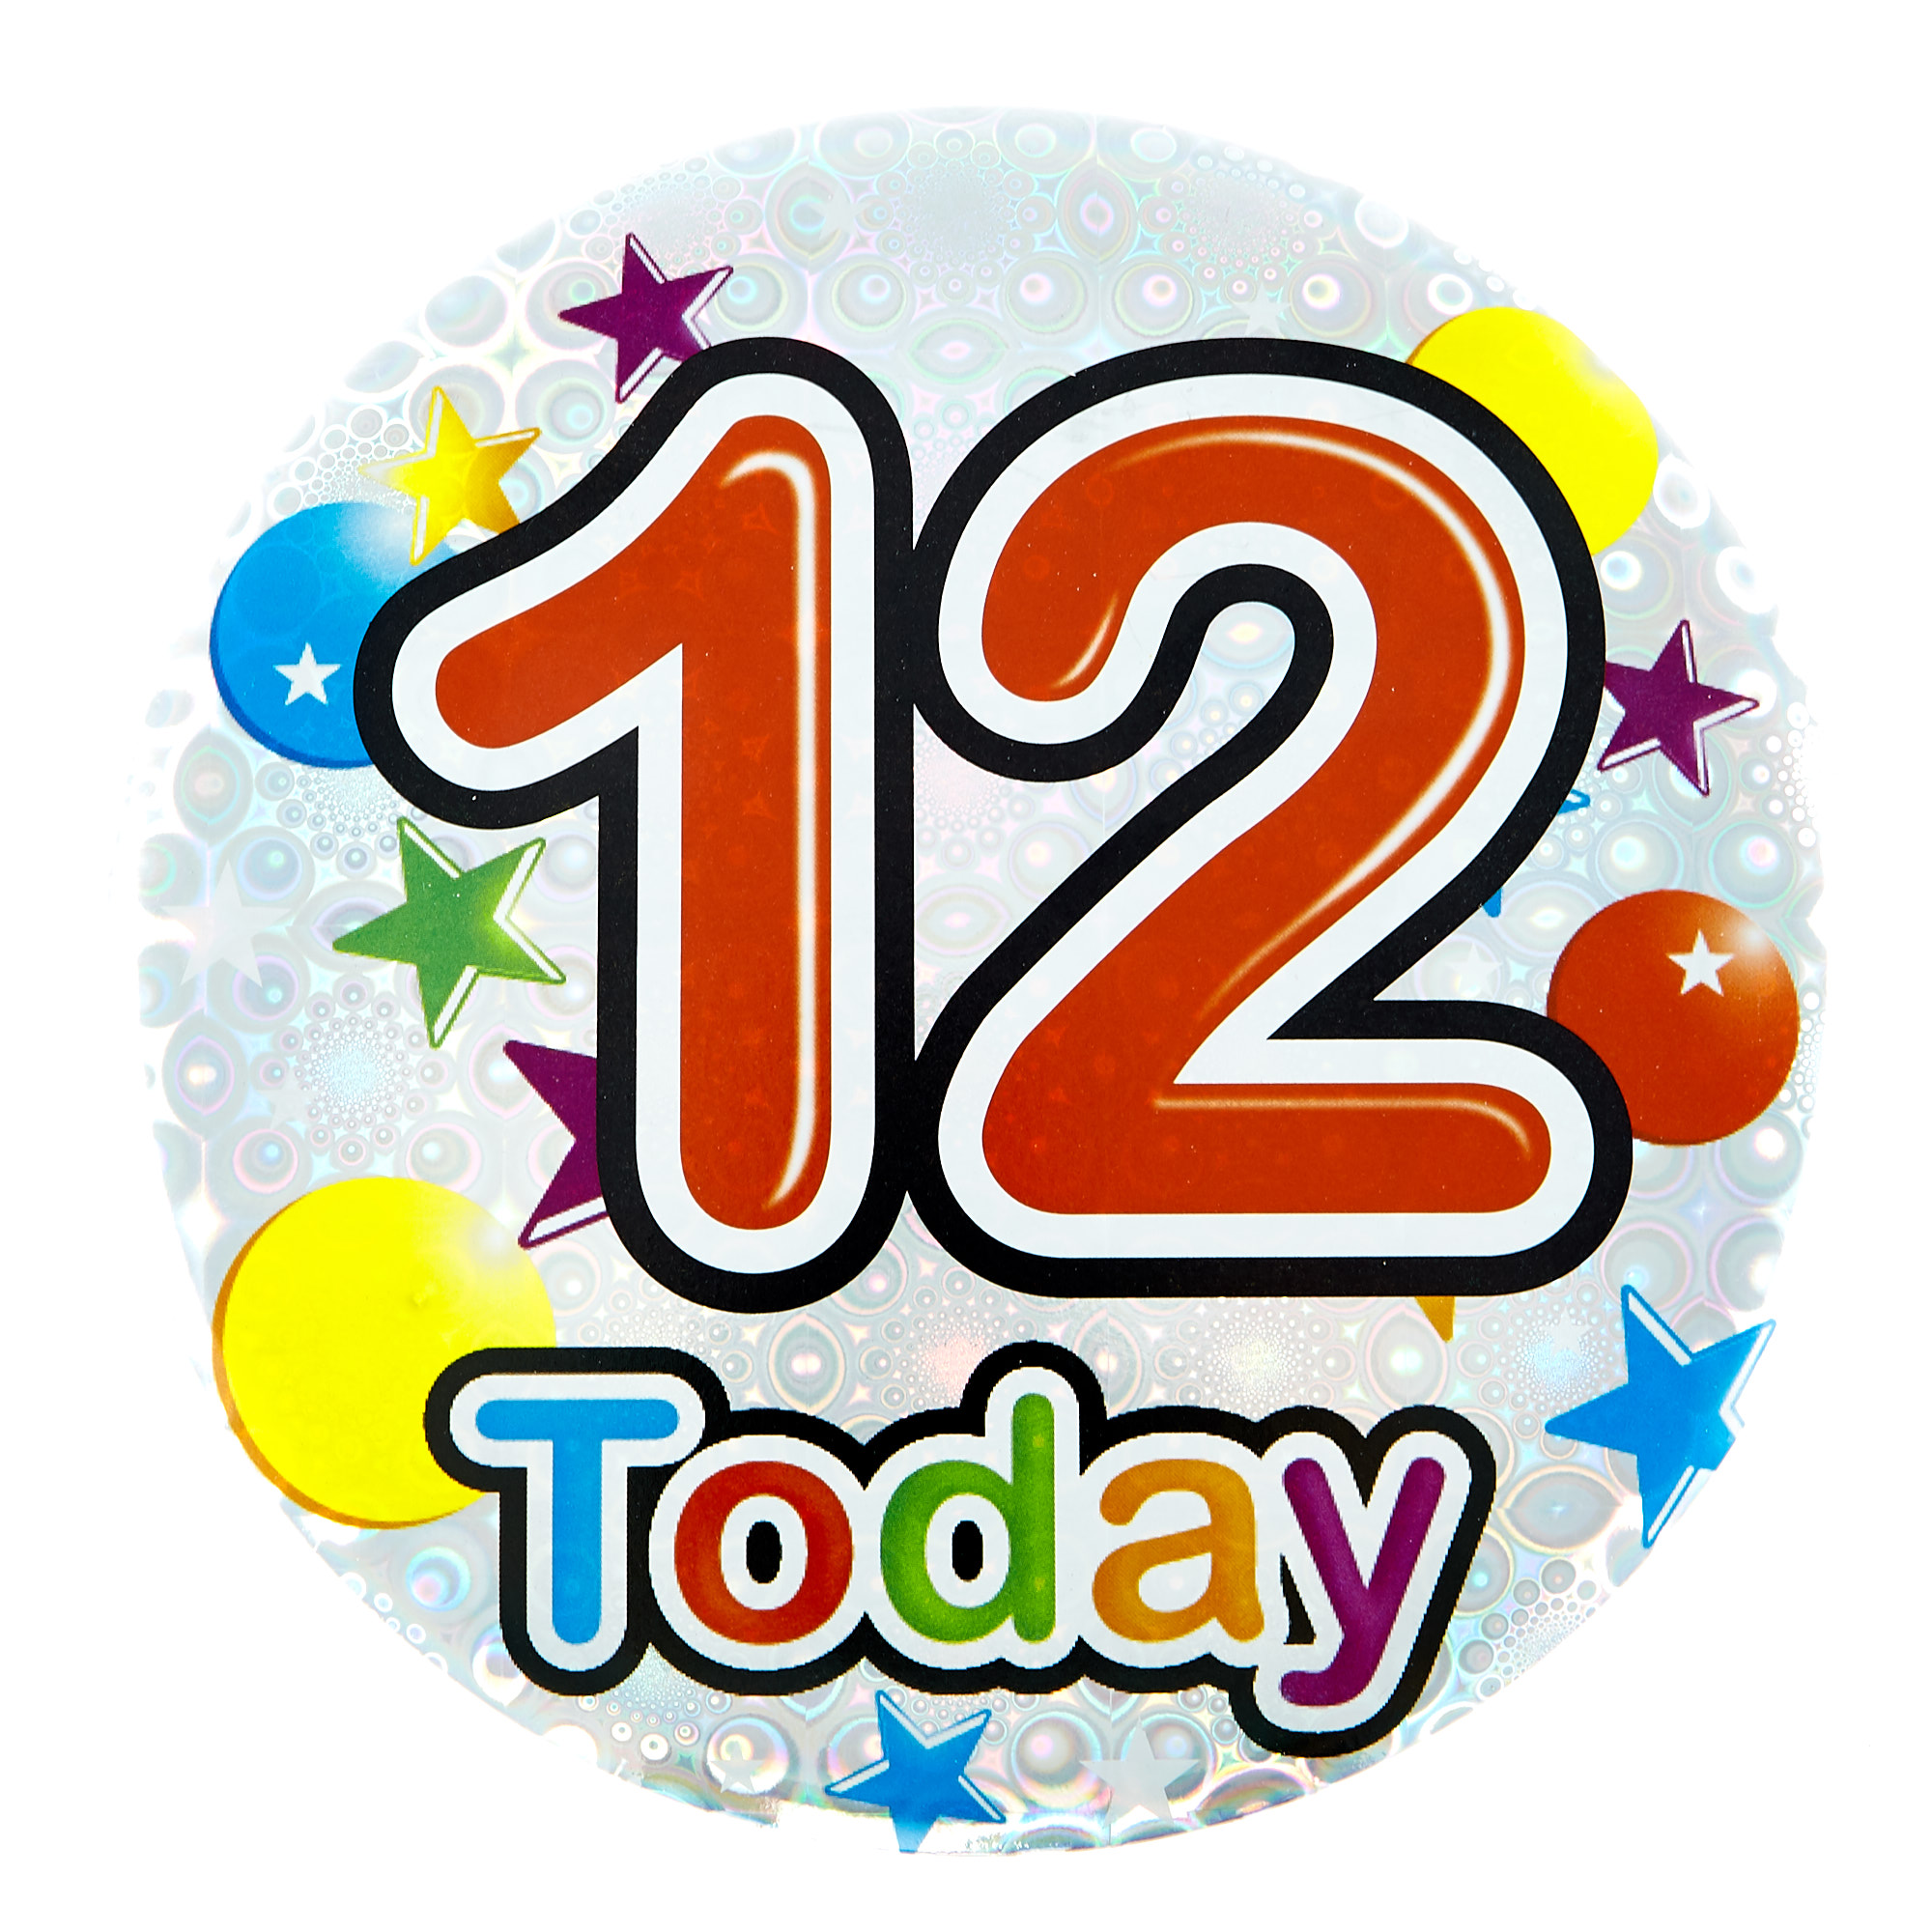 Giant 12th Birthday Badge - Silver